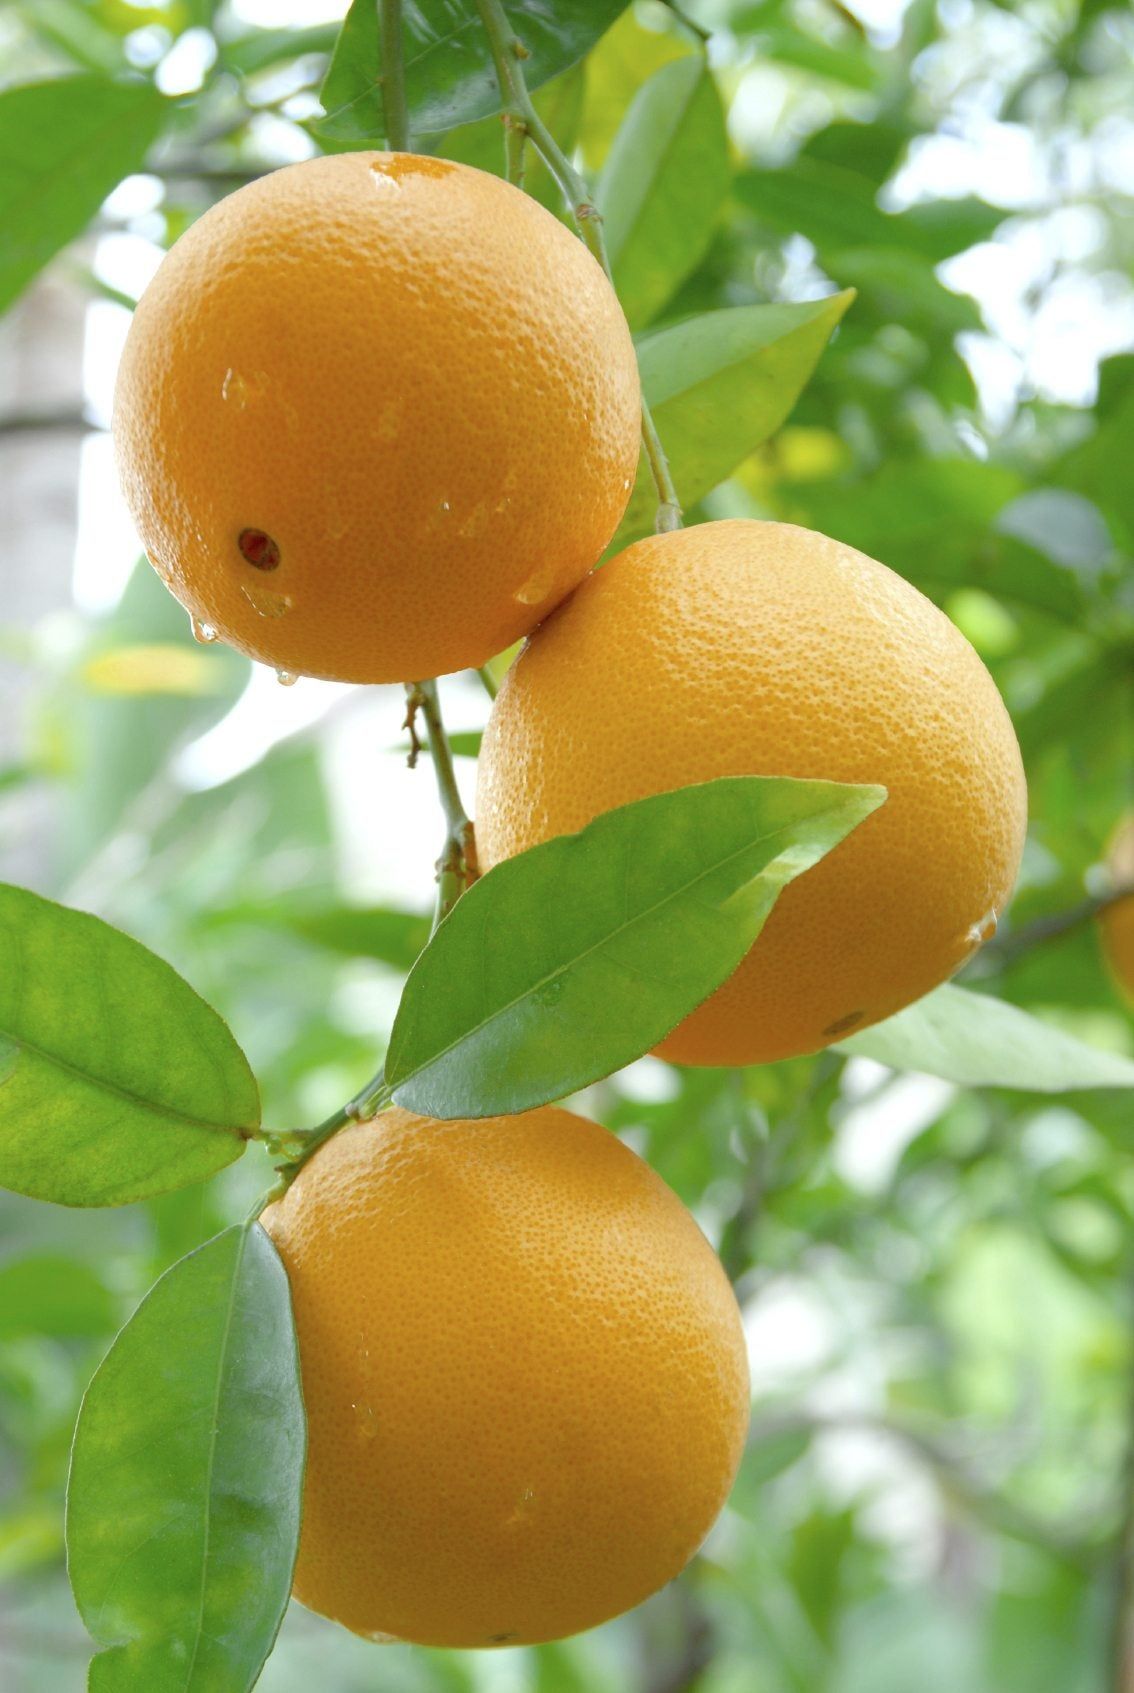 The etymology of “orange”: which came first, the color or the fruit?